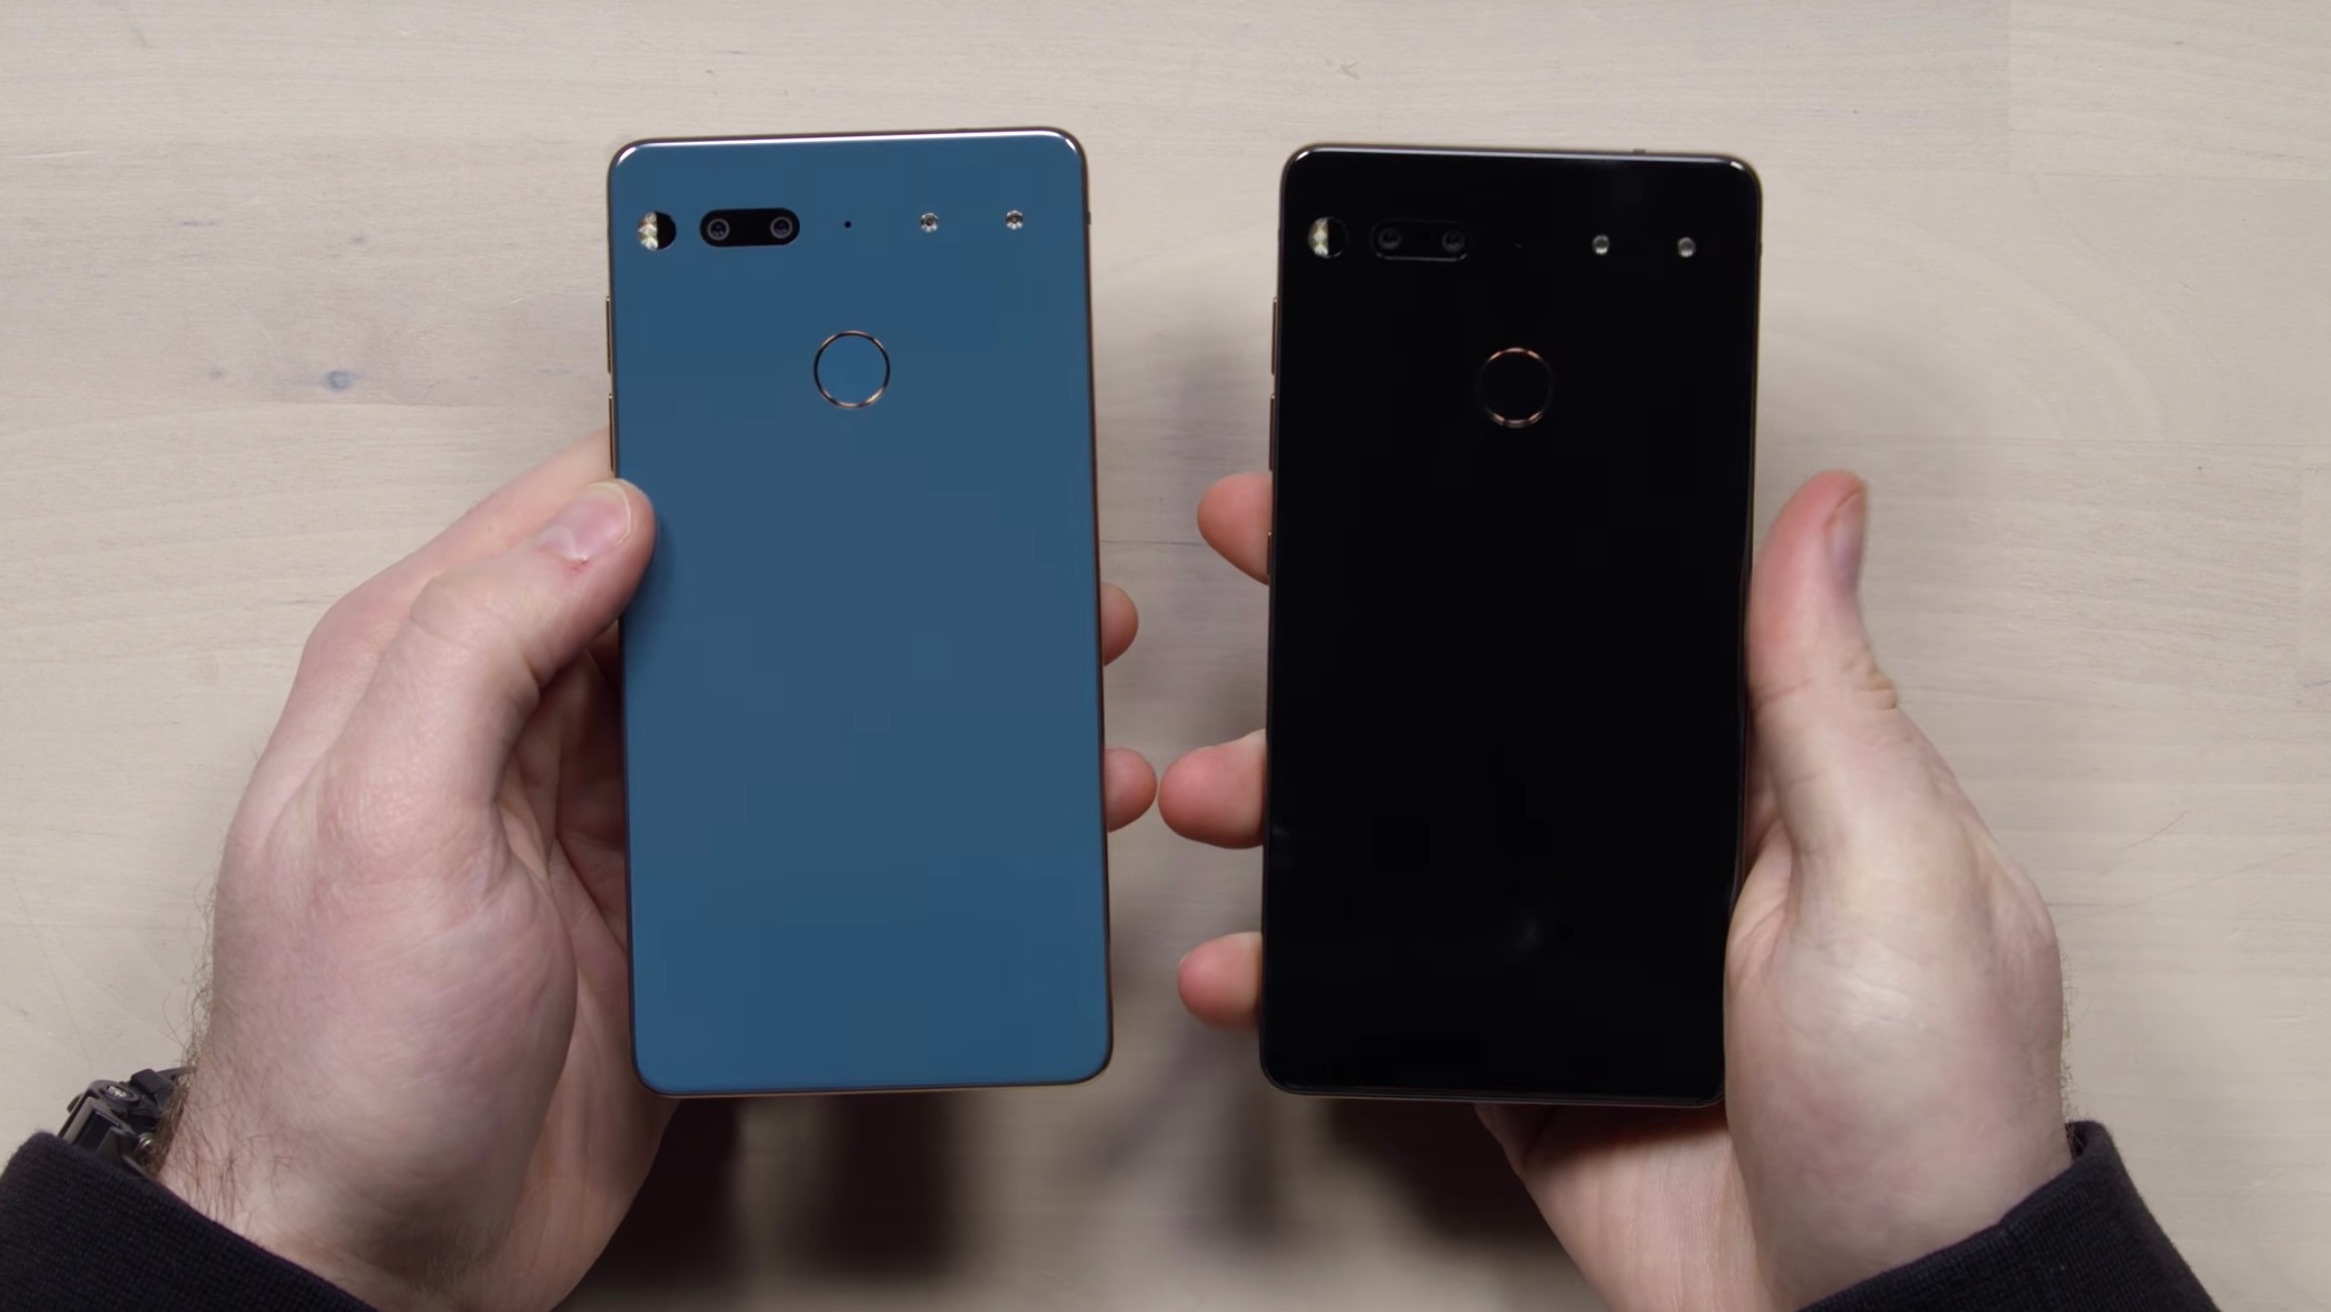 I Can’t Tell What Colour This Phone Is And Honestly It’s Driving Me Nuts